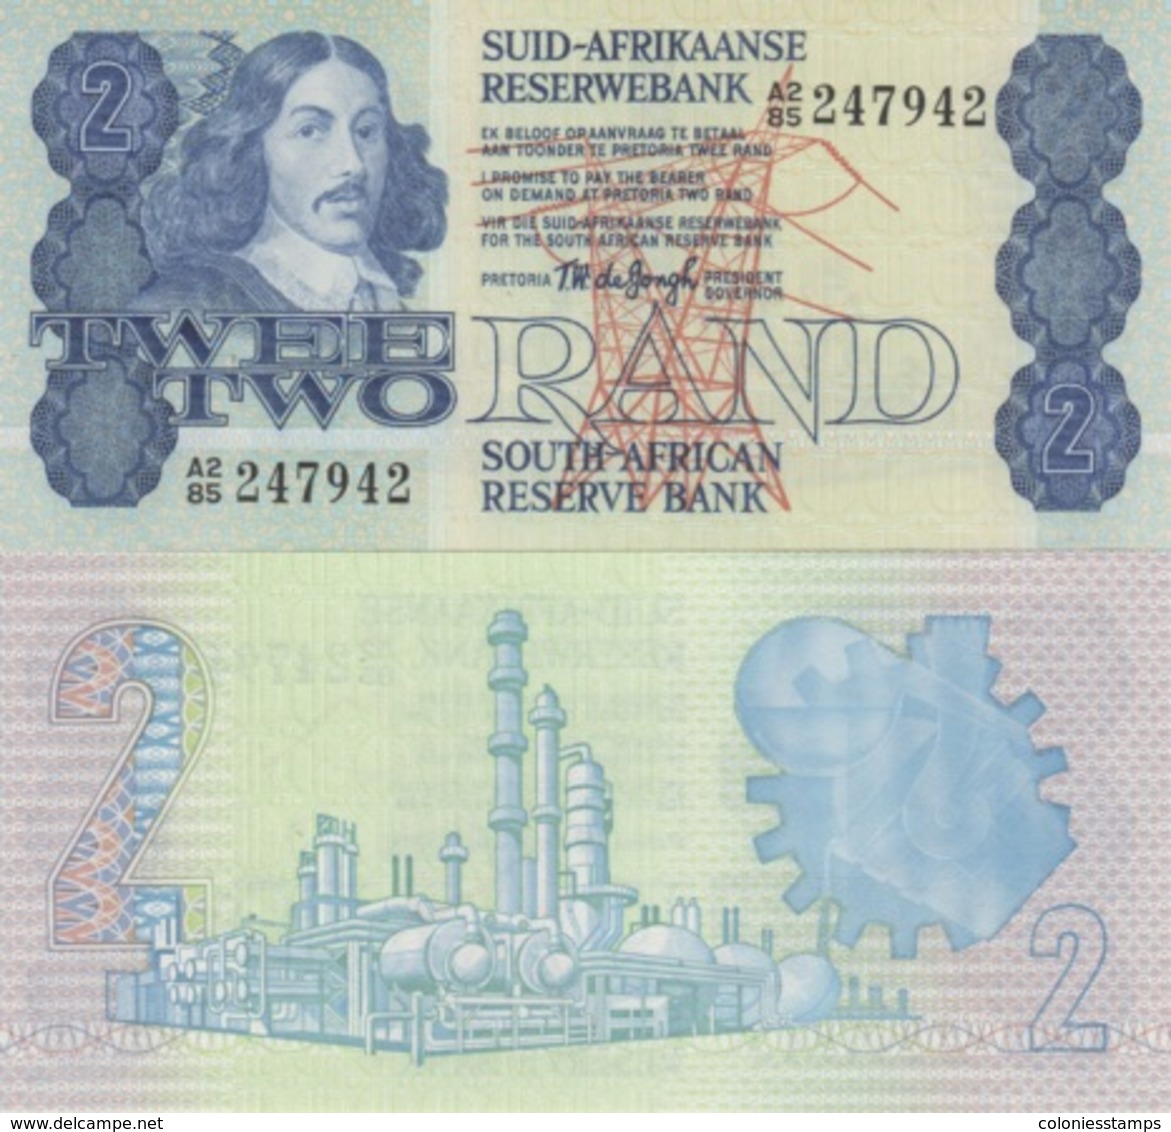 (B0089) SOUTH AFRICA, 1978-1981 (ND). 2 Rand. P-118a. UNC - South Africa